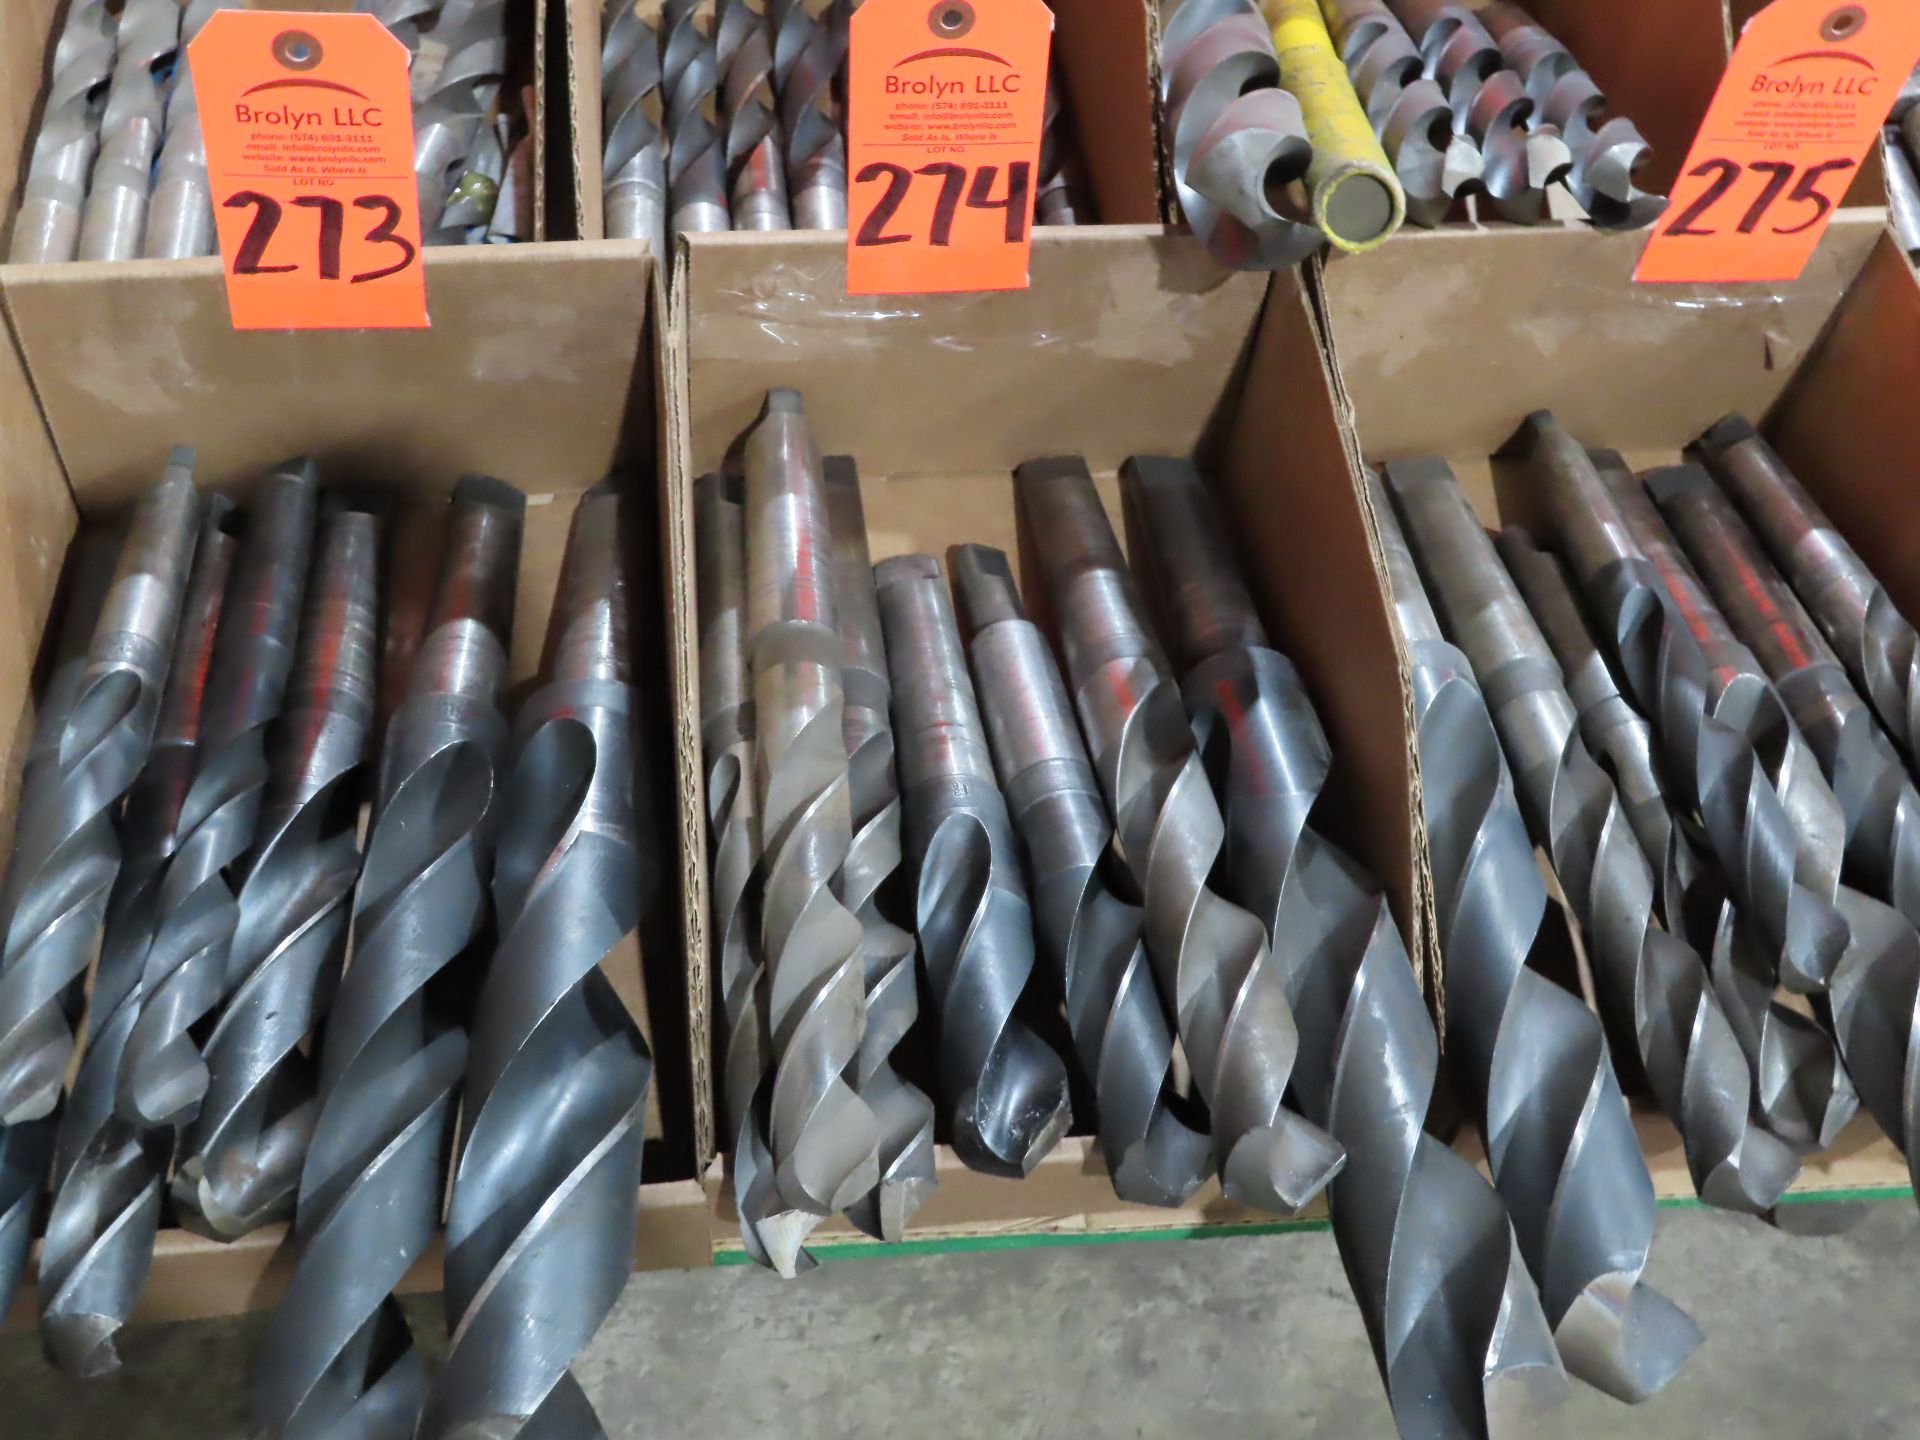 Large assortment of drills. This lot can be picked up onsite with no loading fee. Should you need